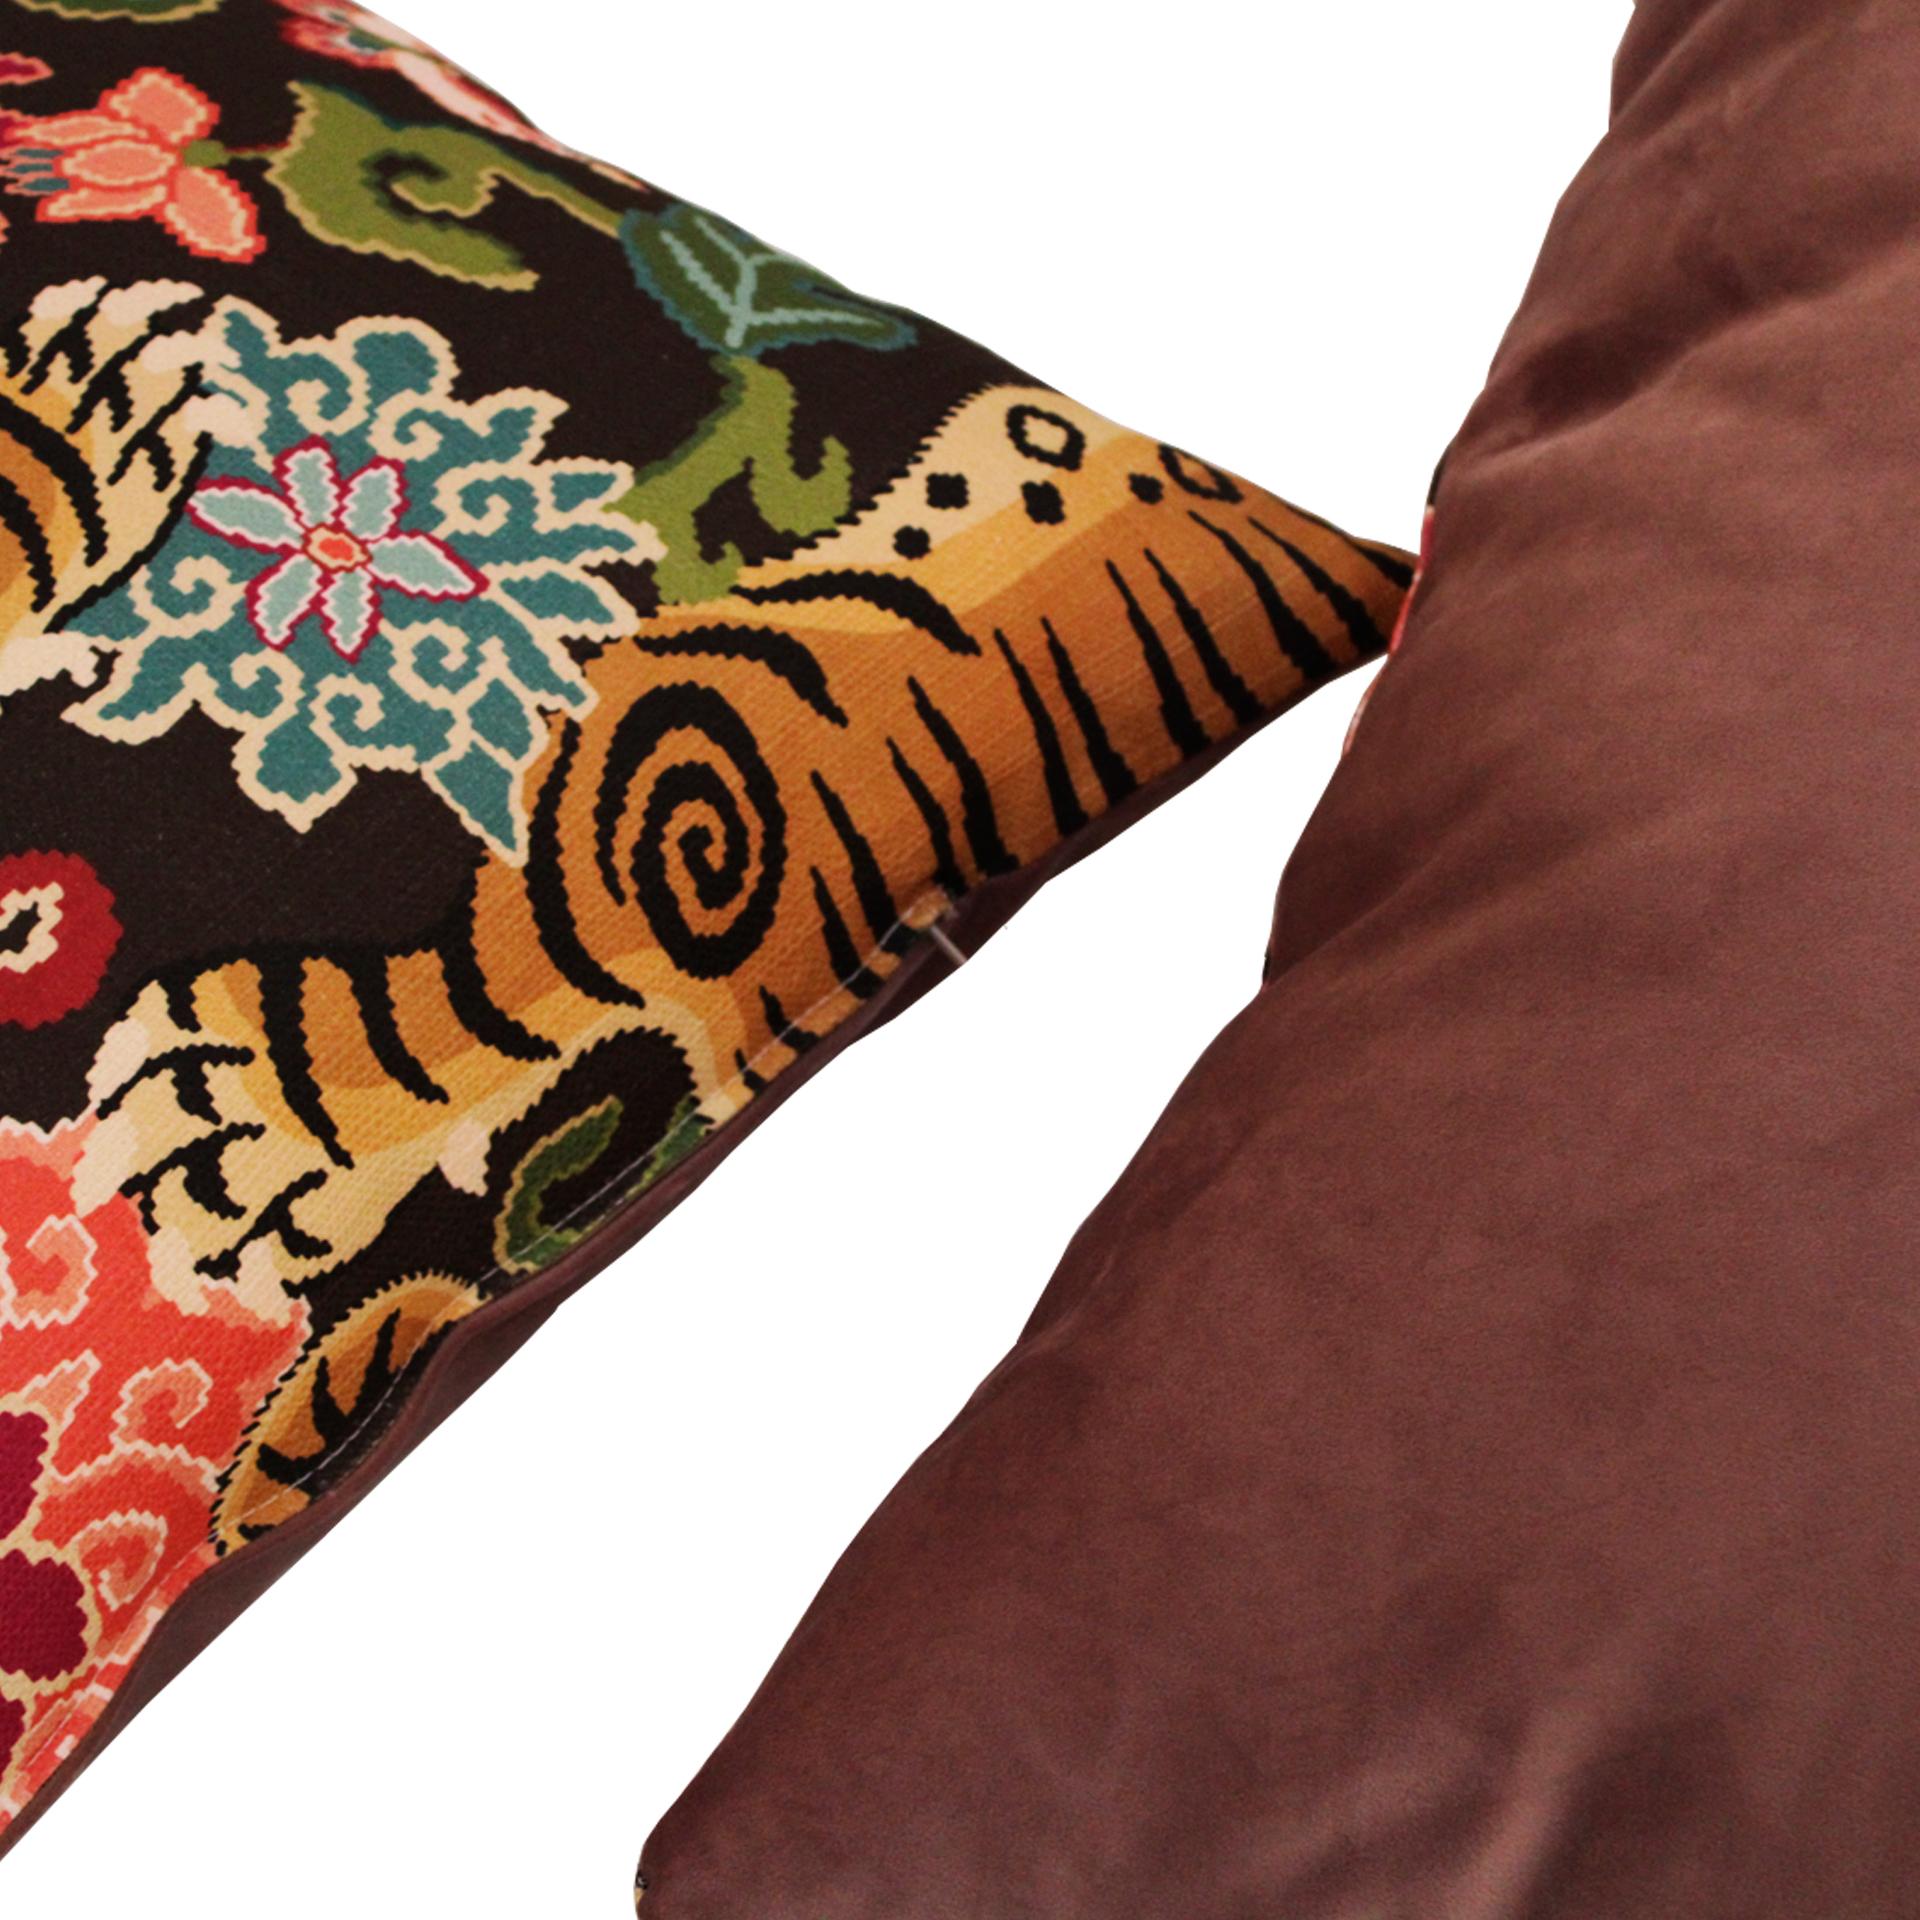 Cushion Withcontemporary Jungle Print in Velvet and Cotton In Good Condition For Sale In Ibiza, Spain